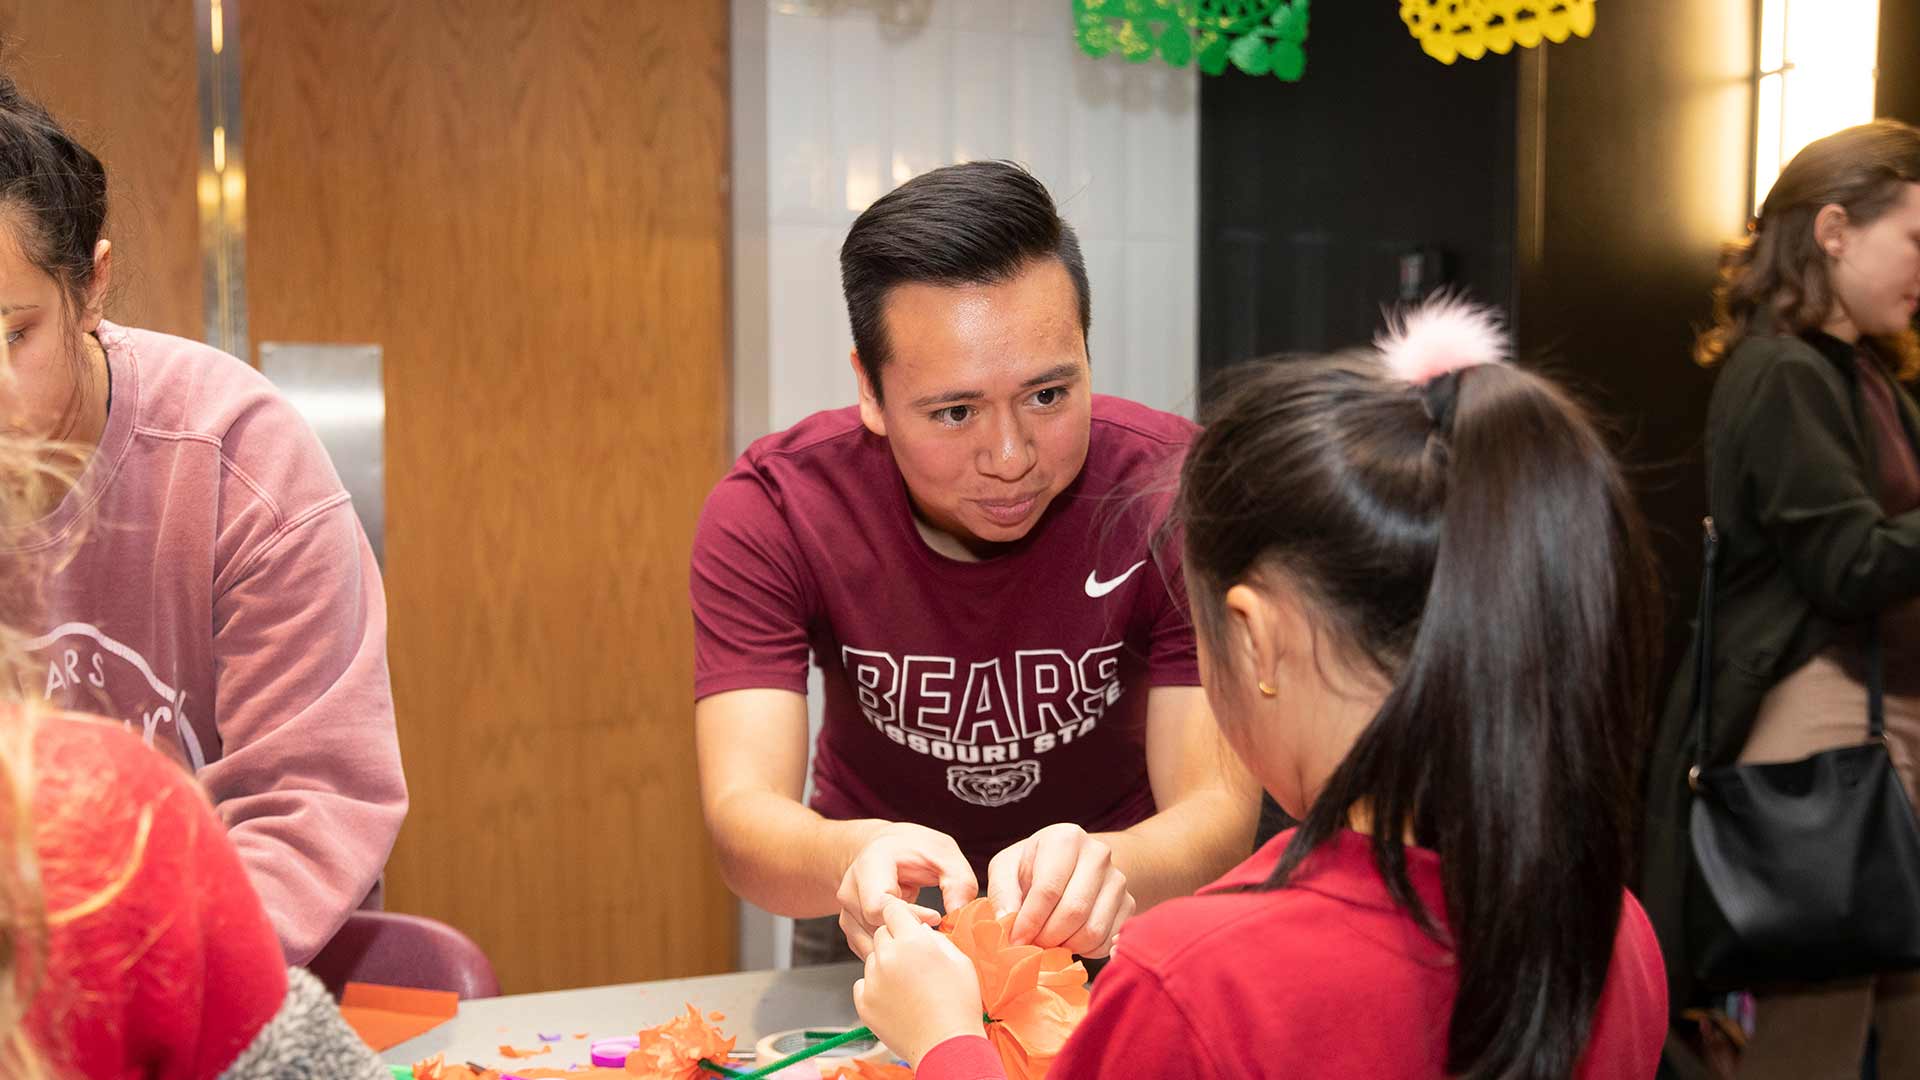 A Missouri State student interacts with a young child during a campus event for Day of the Dead celebration.